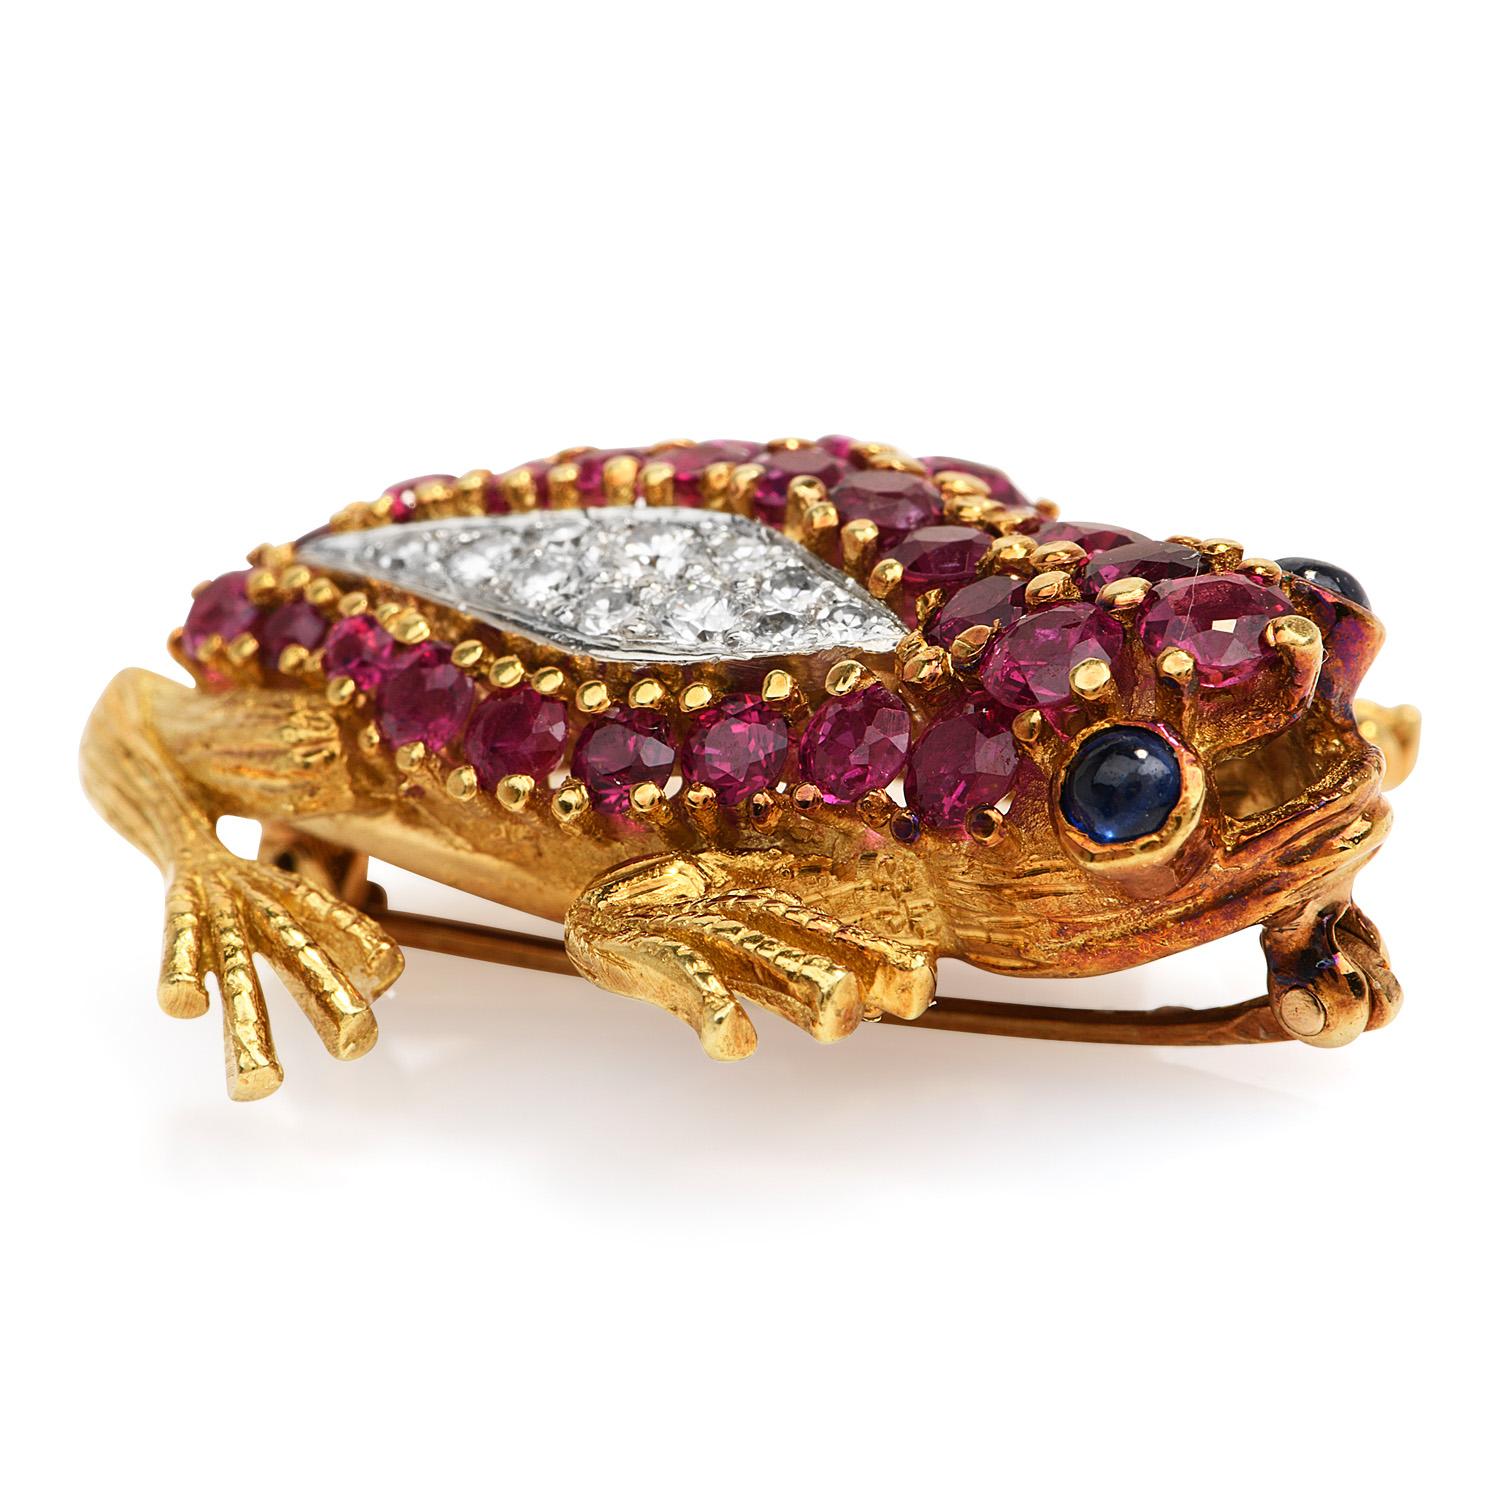 This textured 1980's  frog motif brooch pin is excellent for nature lovers, 

Crafted in solid 18K yellow gold by Hammerman Brothers, topped by (11) round cut diamonds, pave set, weighing approximately 0.30 carats (H-I  color and VS clarity)

With